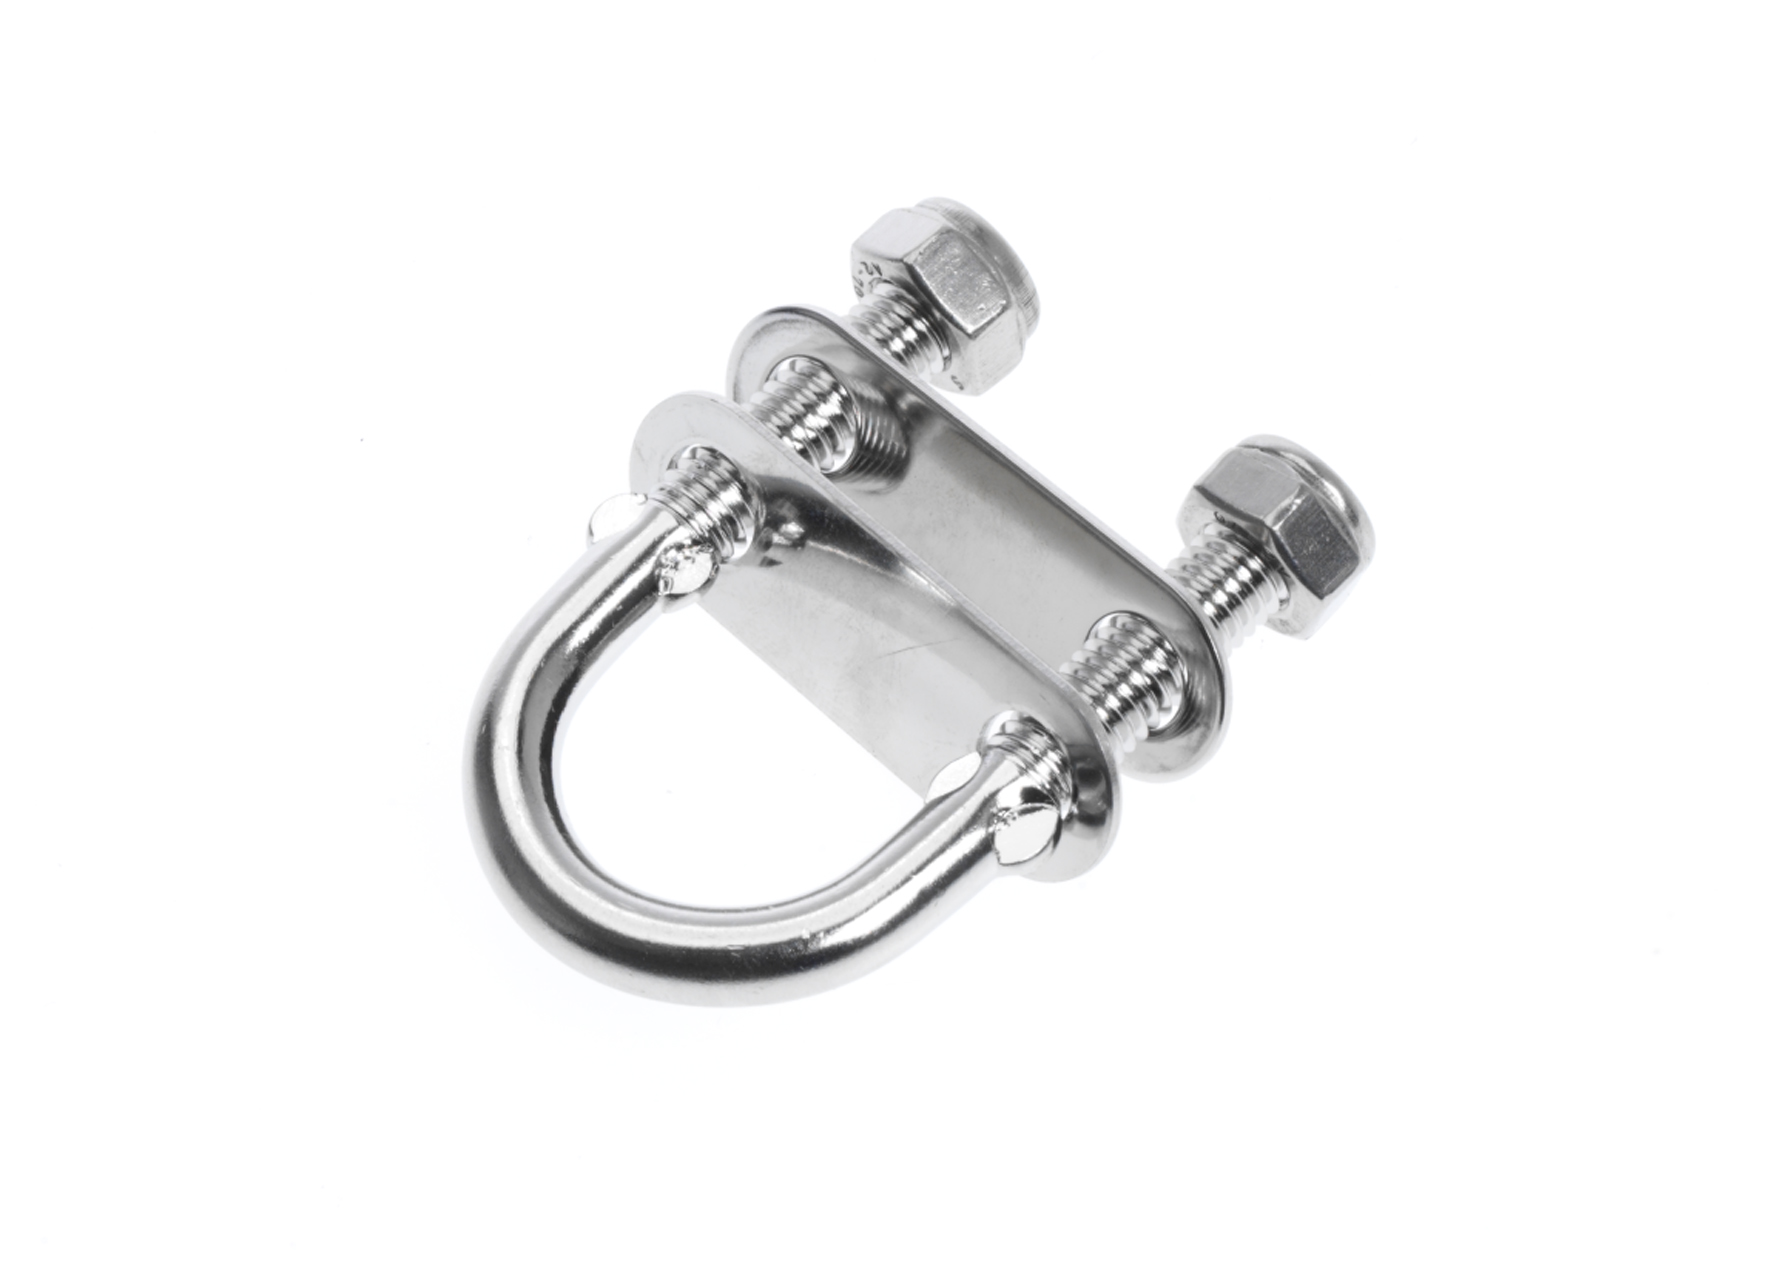 1Pcs Boat 304 Stainless Steel "U Bolt" Cleat 12mm Ring Bow Transom Eye Rigging